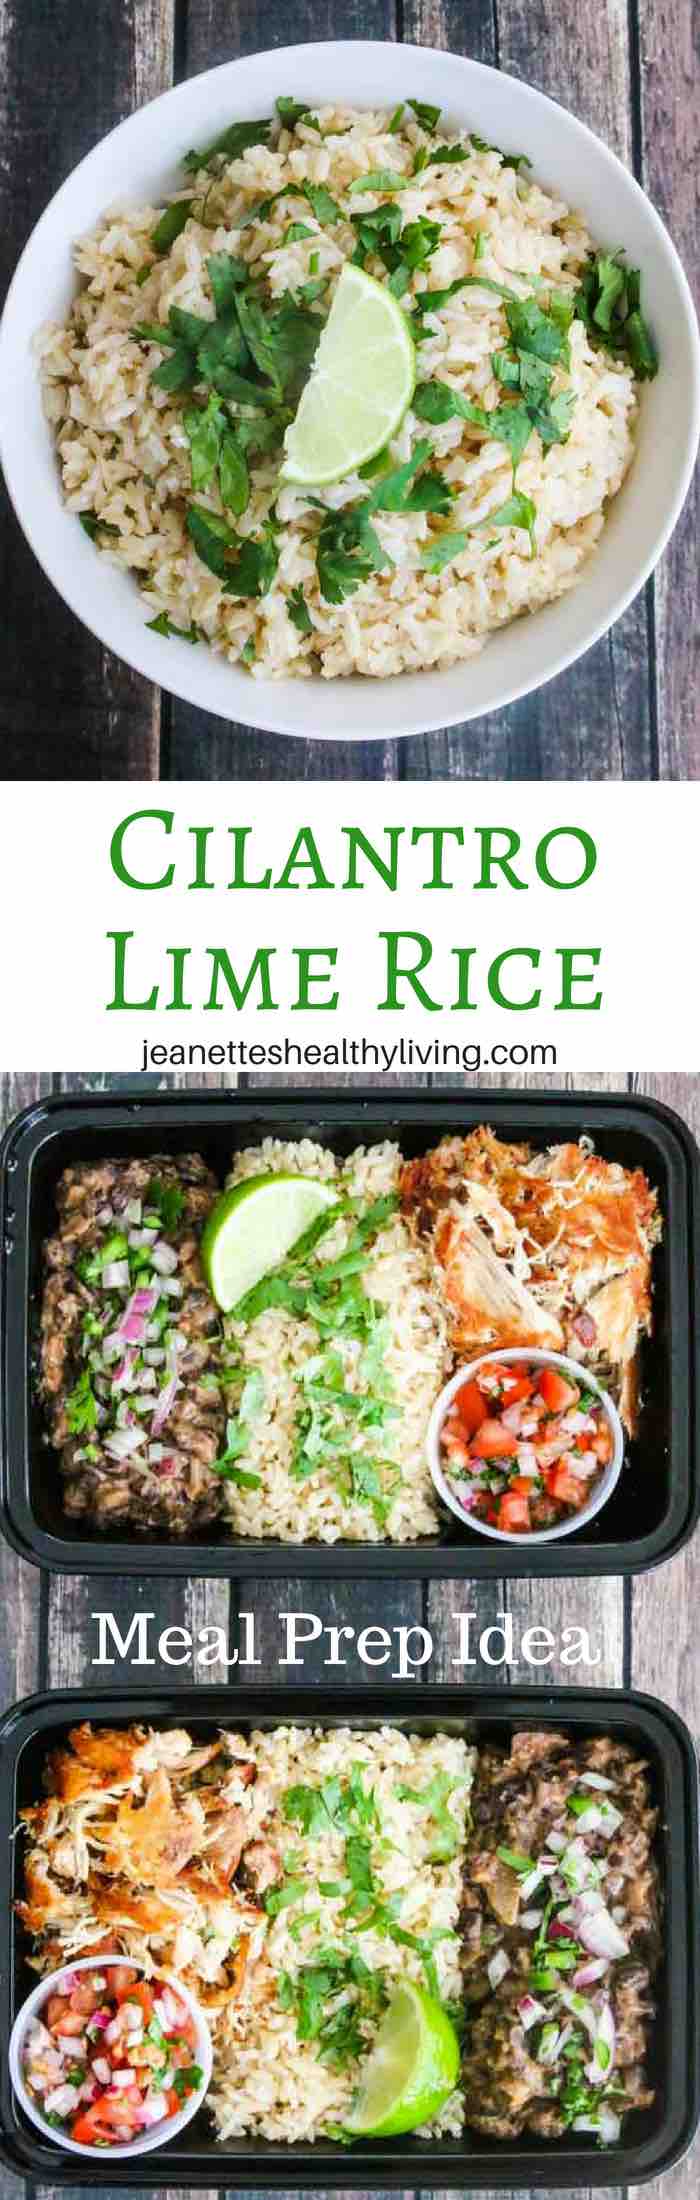 Copycat Chipotle Cilantro Lime Rice - serve with beans, carnitas; great for meal prep